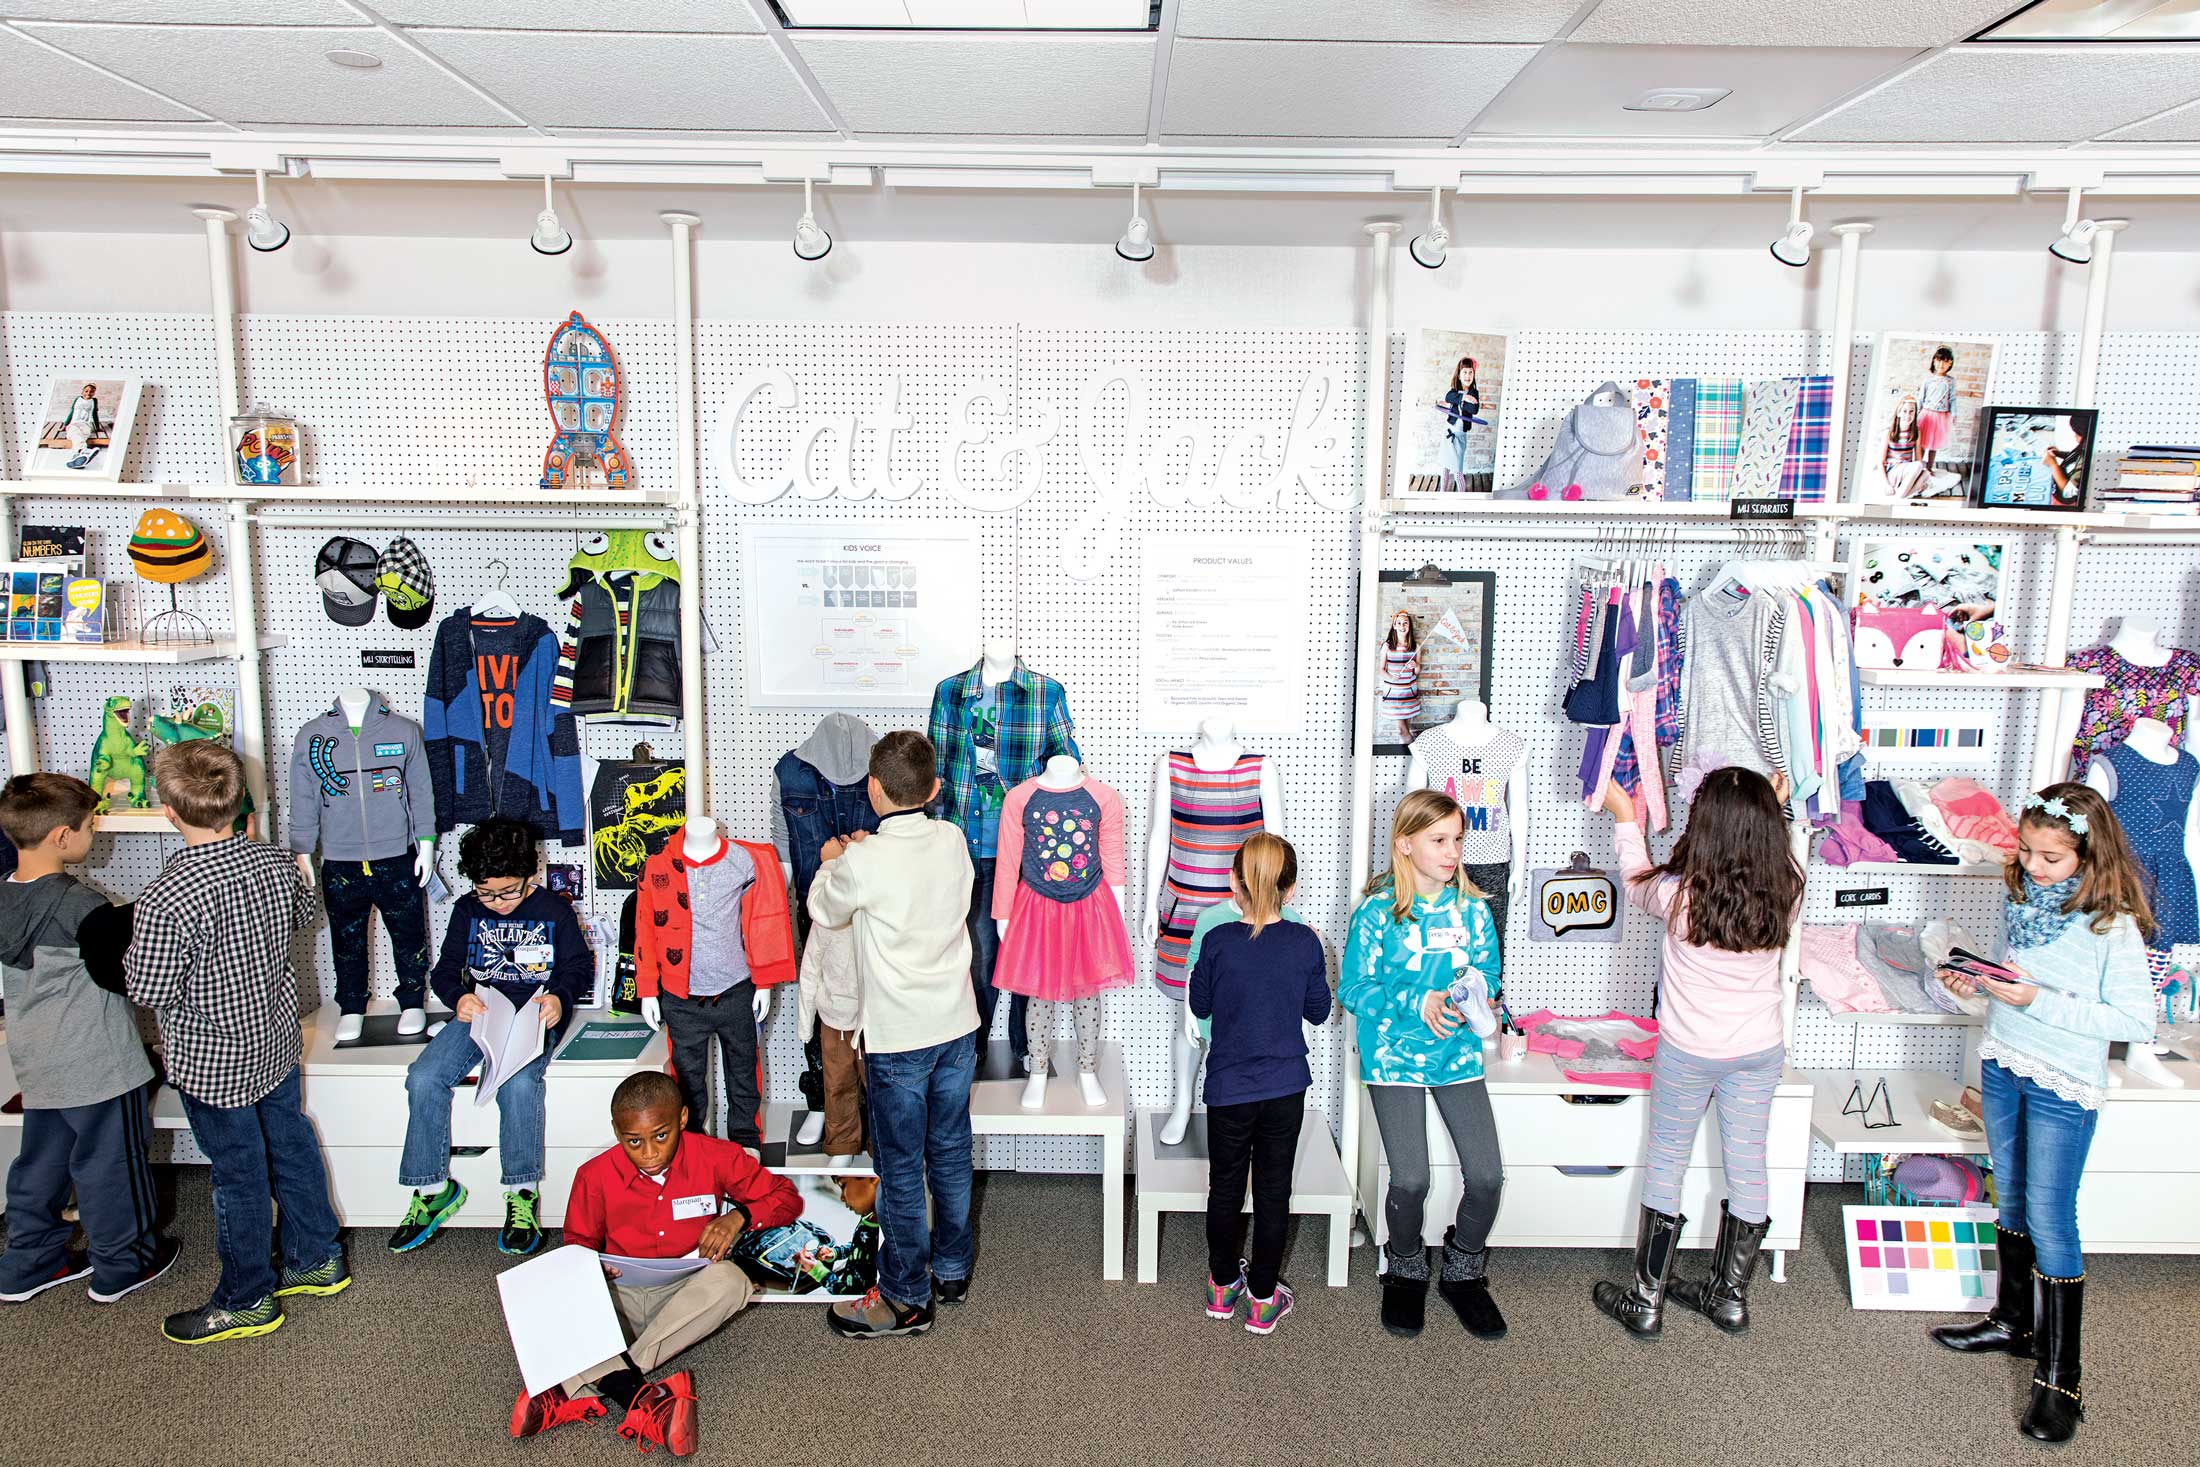 Holiday shopping in gender-neutral toy aisles? Playing for the future